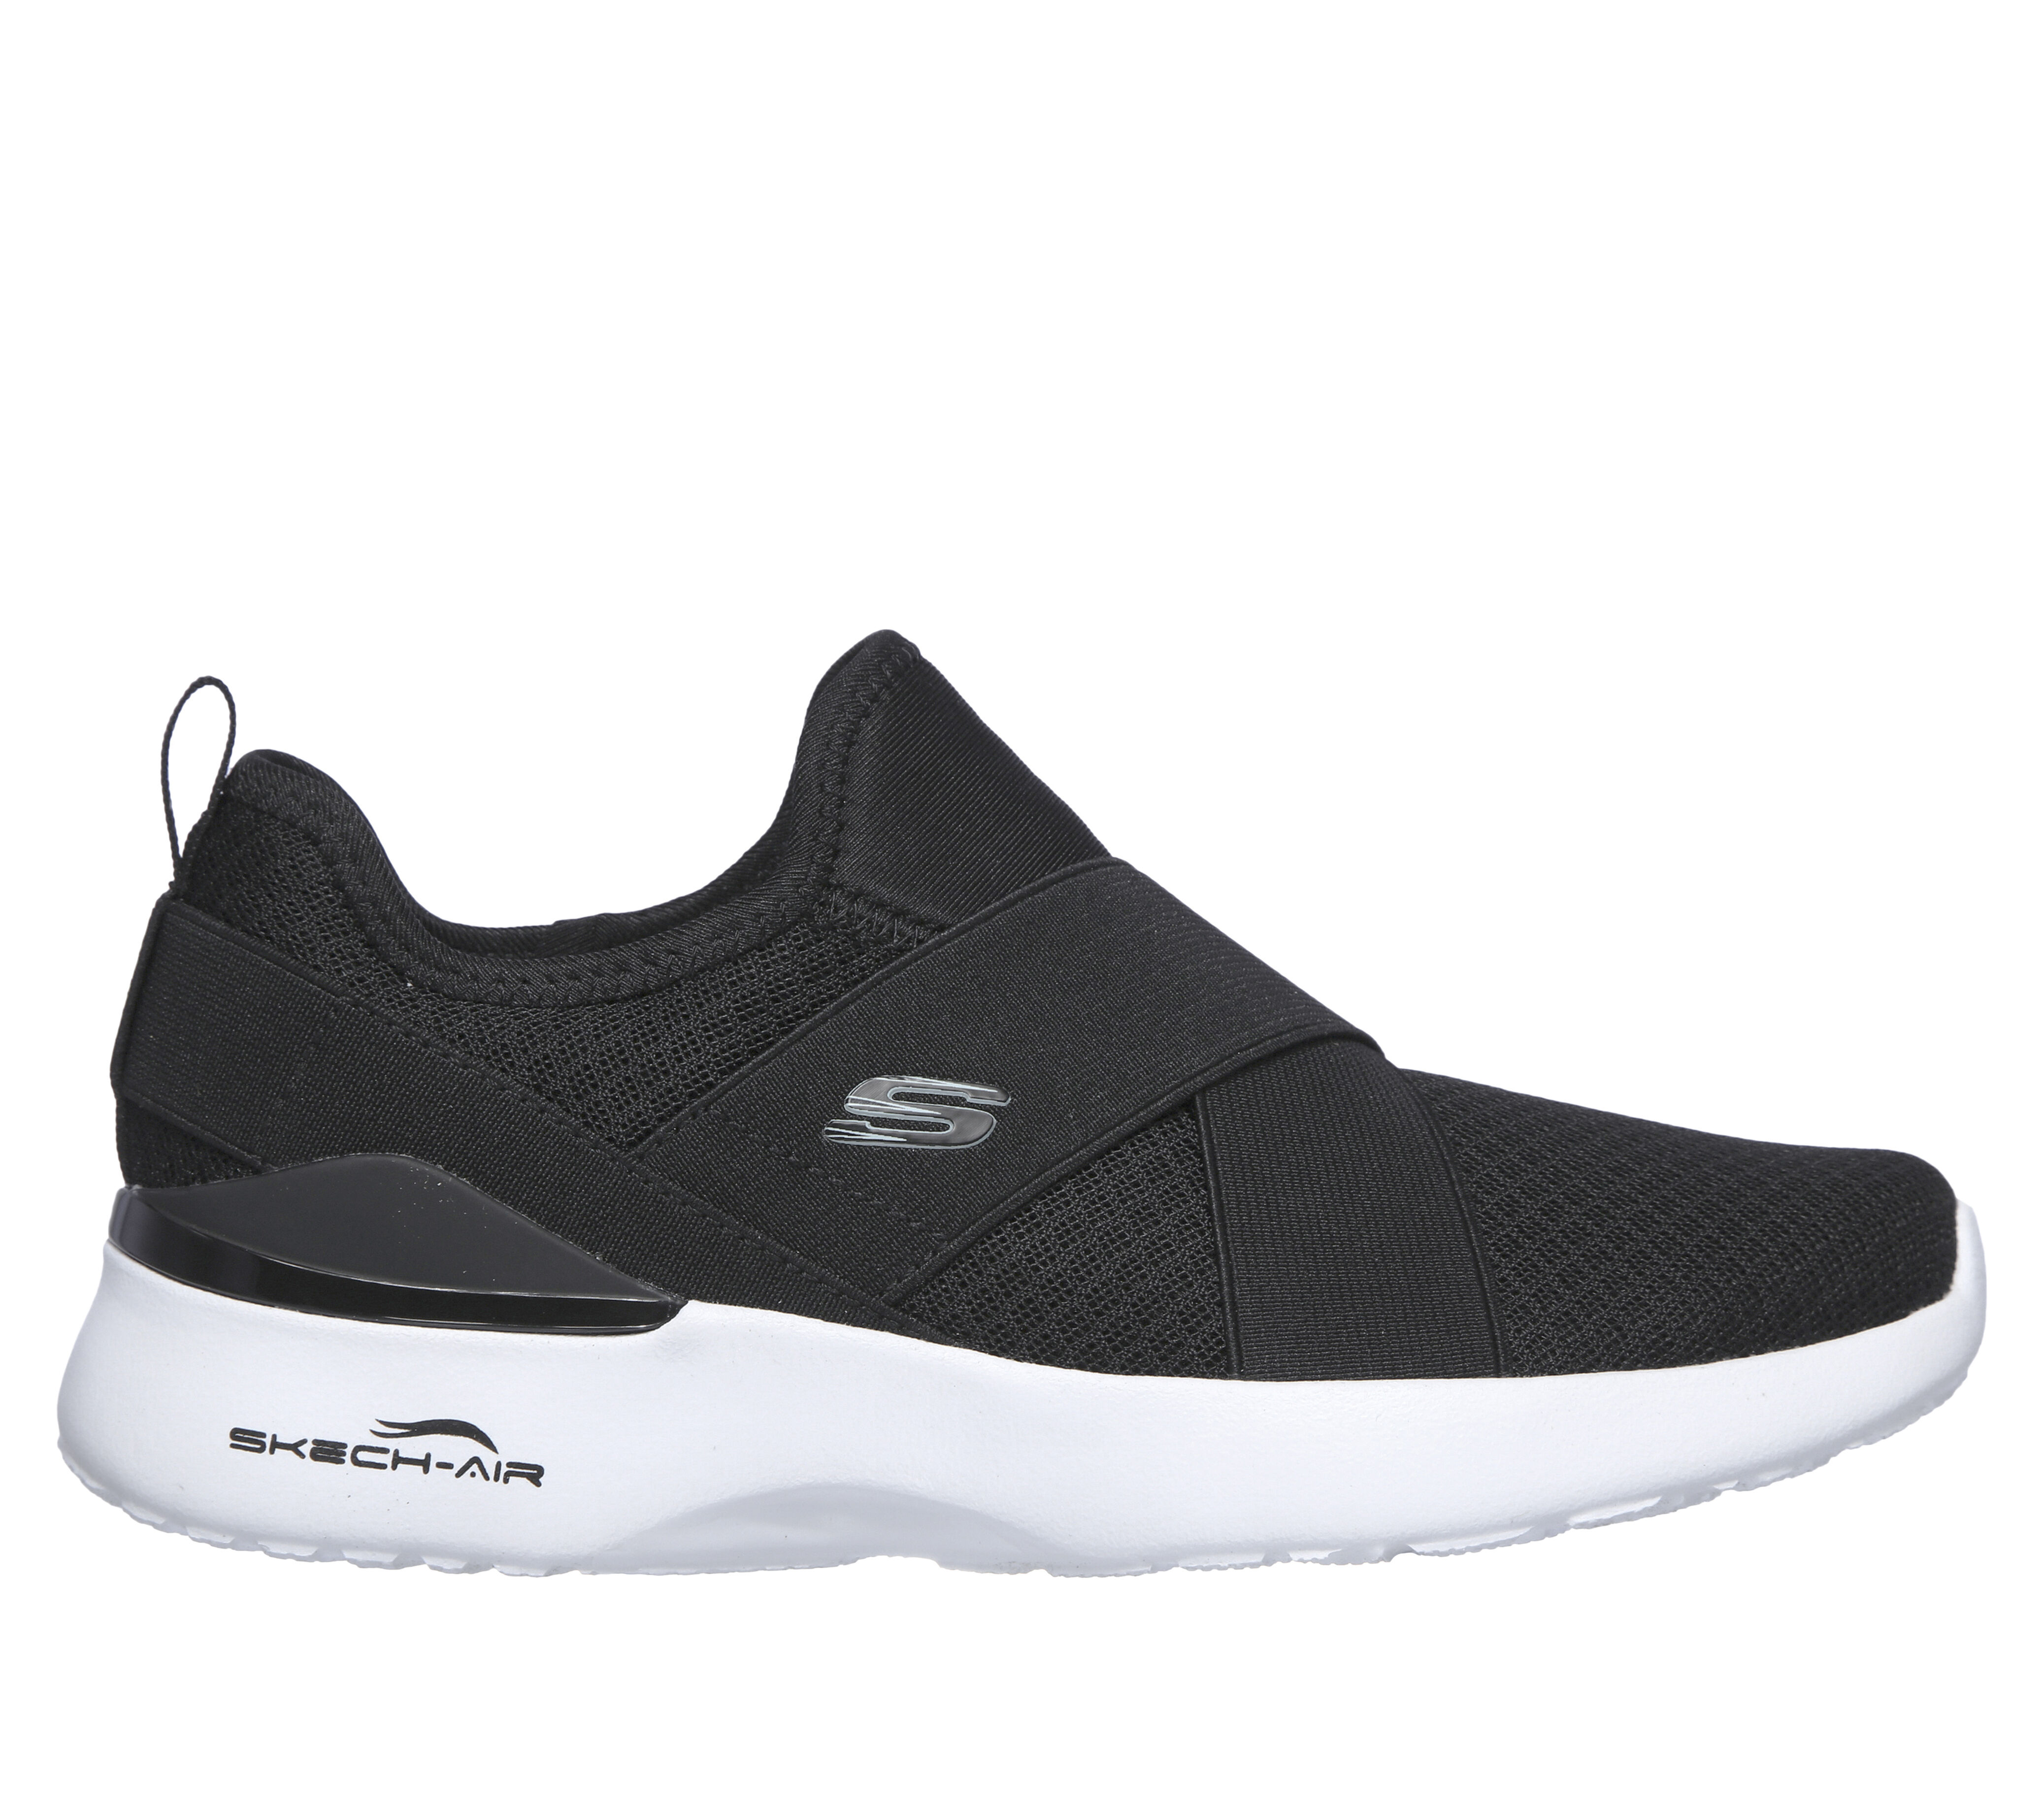 Skechers Skech-Air Dynamight - Easy Call Slip-On Shoes, Black, 5.5